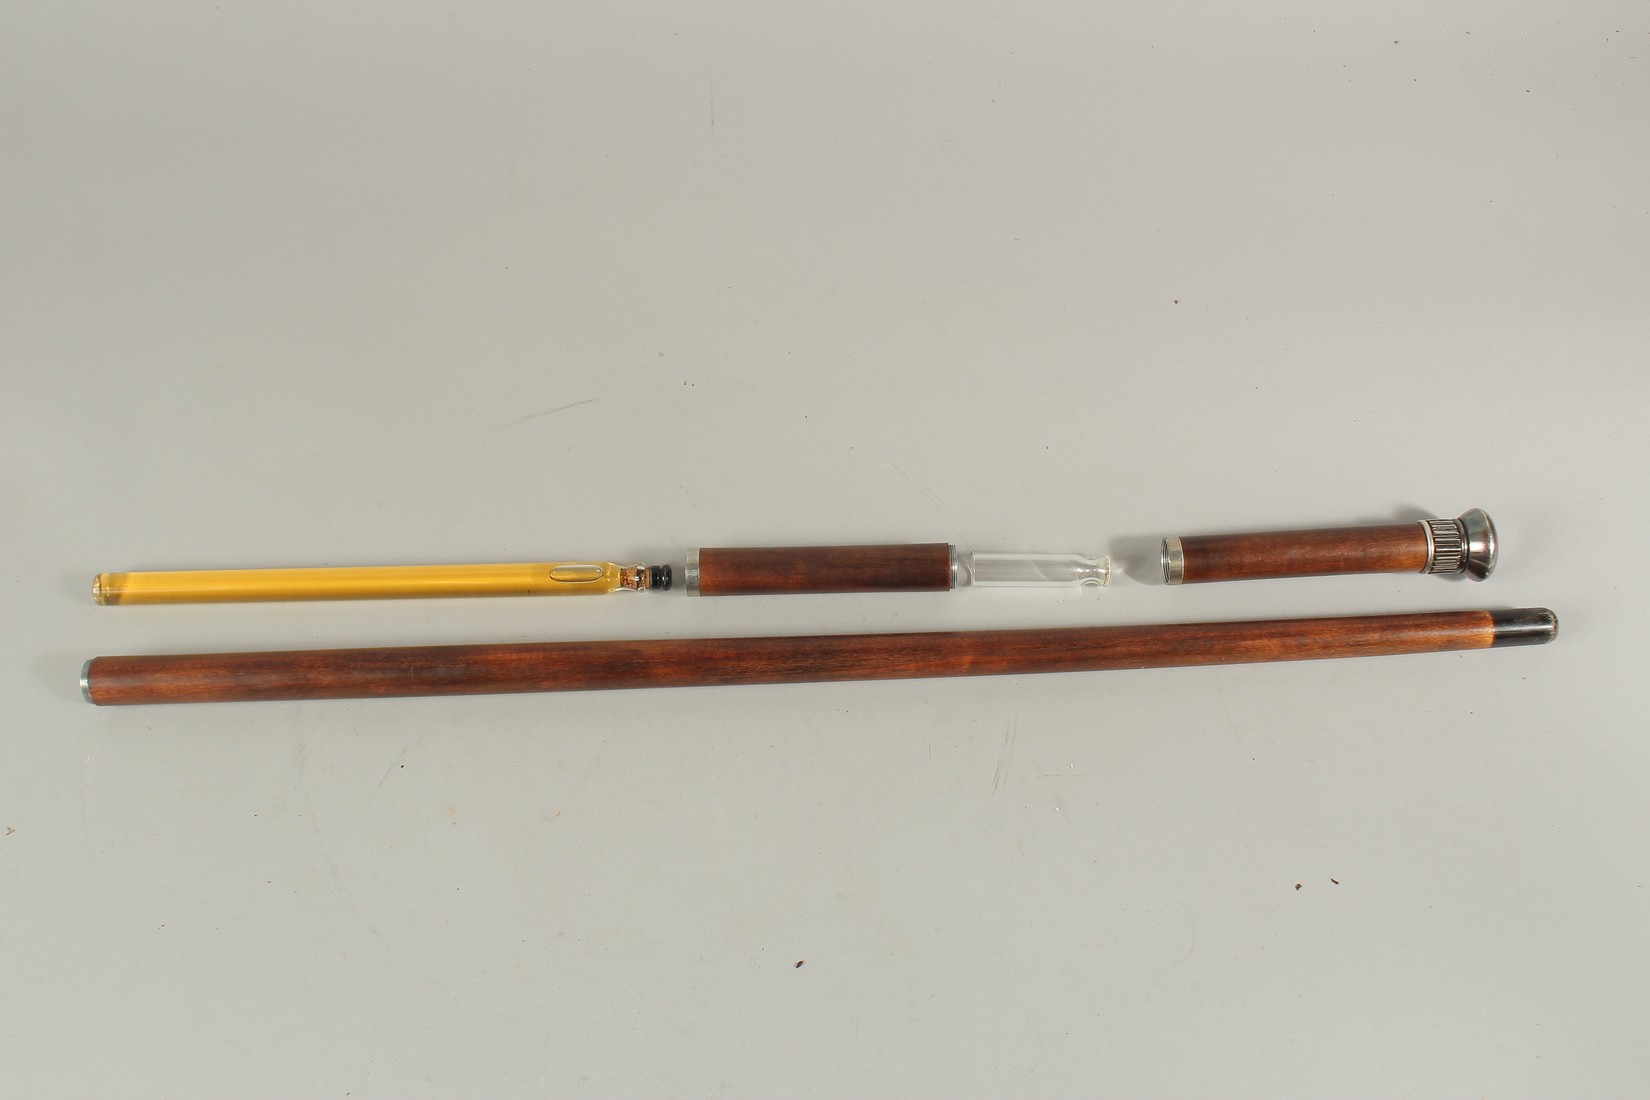 A RARE 19TH CENTURY WALKING STICK with metal top and two screw off sections revealing a long glass - Image 2 of 7